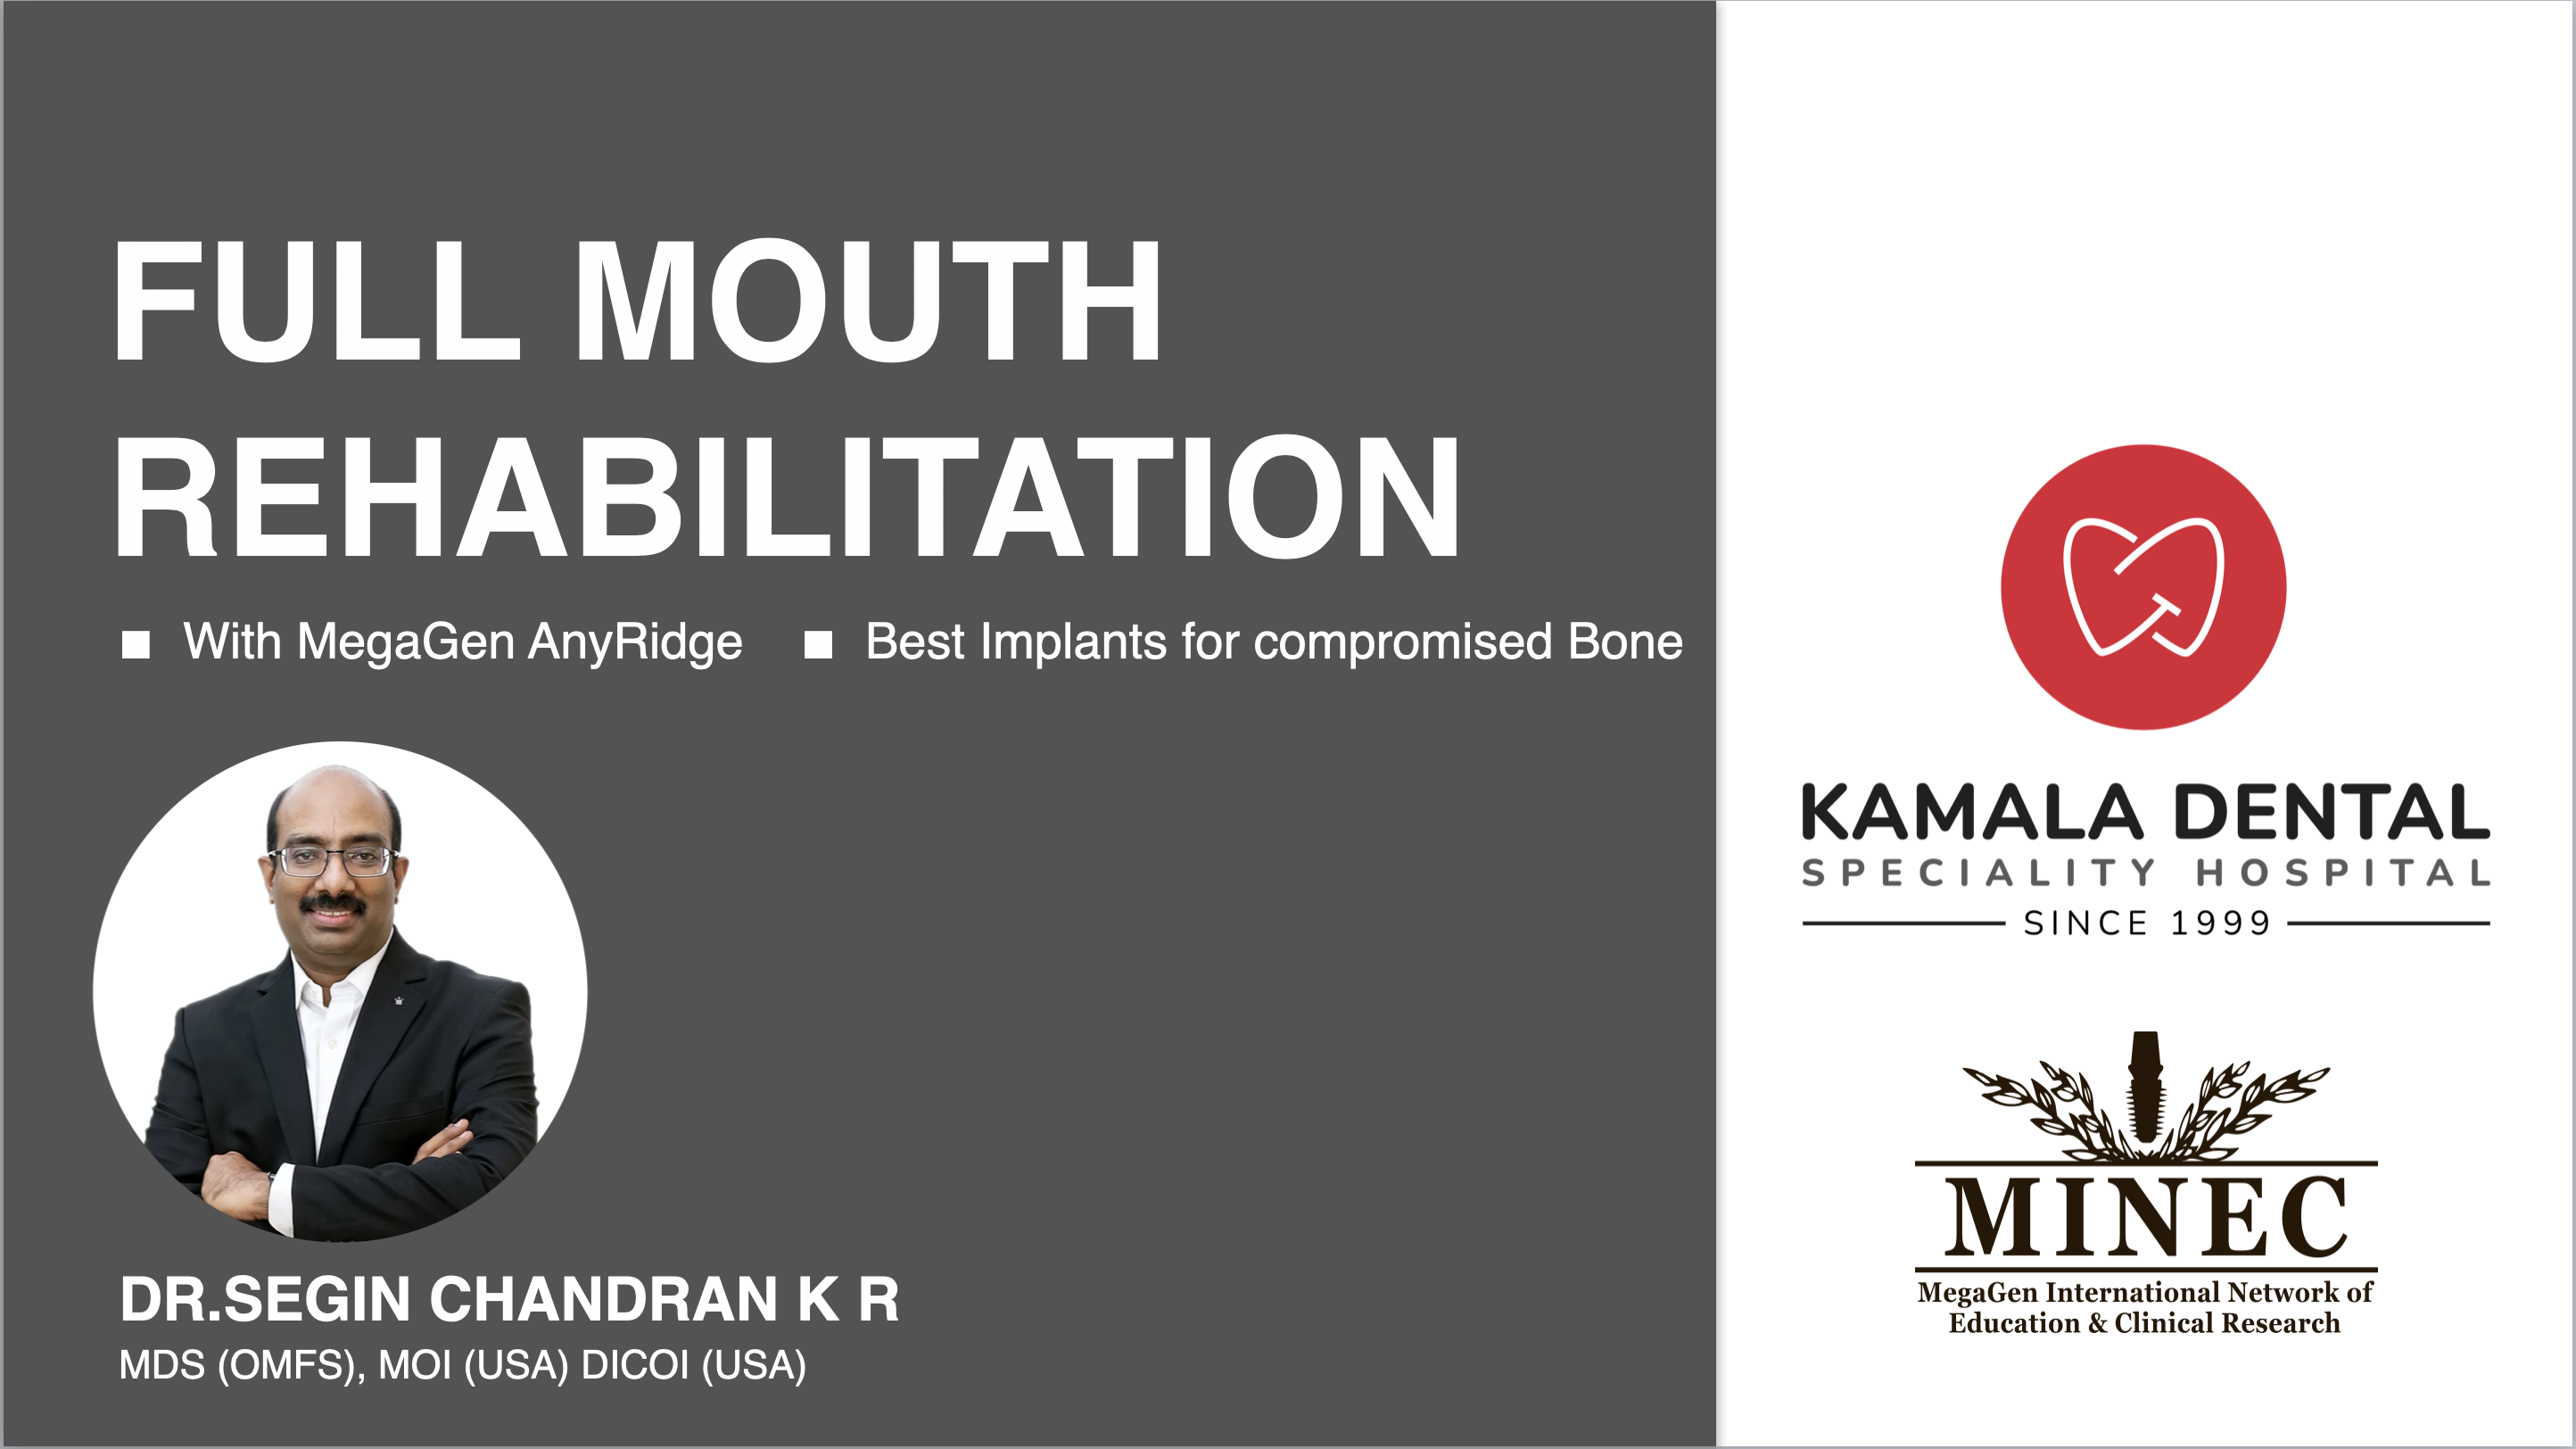 Full Mouth Rehabilitation with MegaGen AnyRidge: Best Implants for Compromised Bone